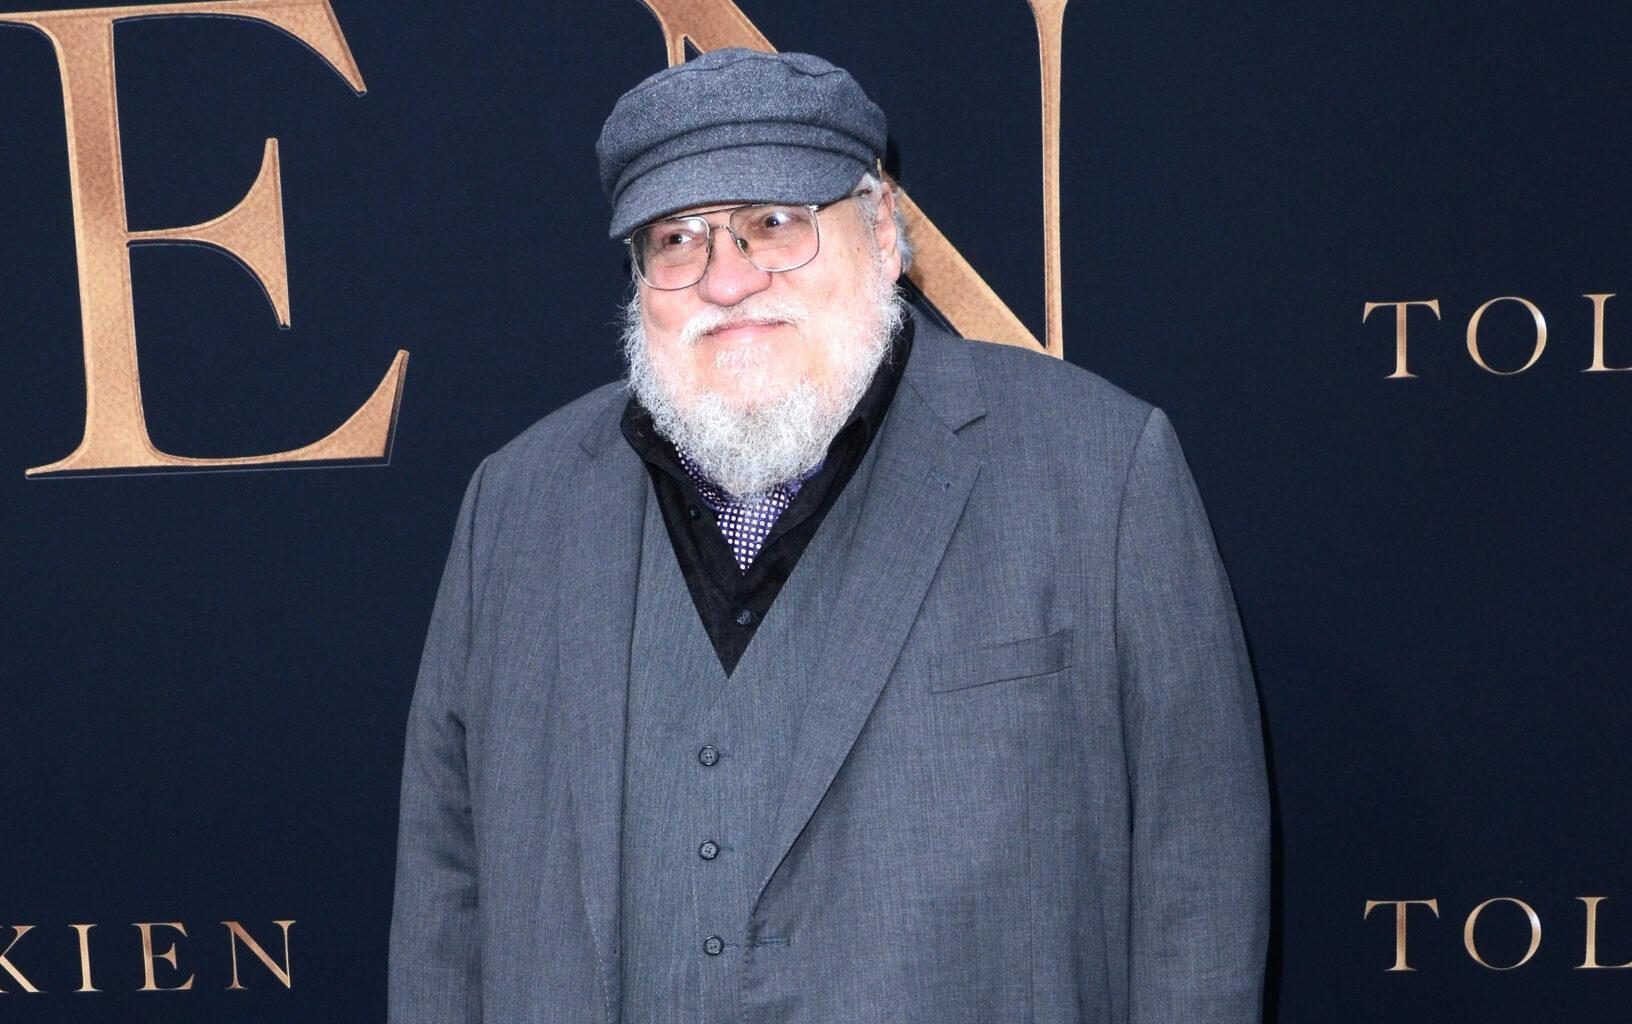 George R. R. Martin at the "Tolkien" LA Special Screening at the Village Theater